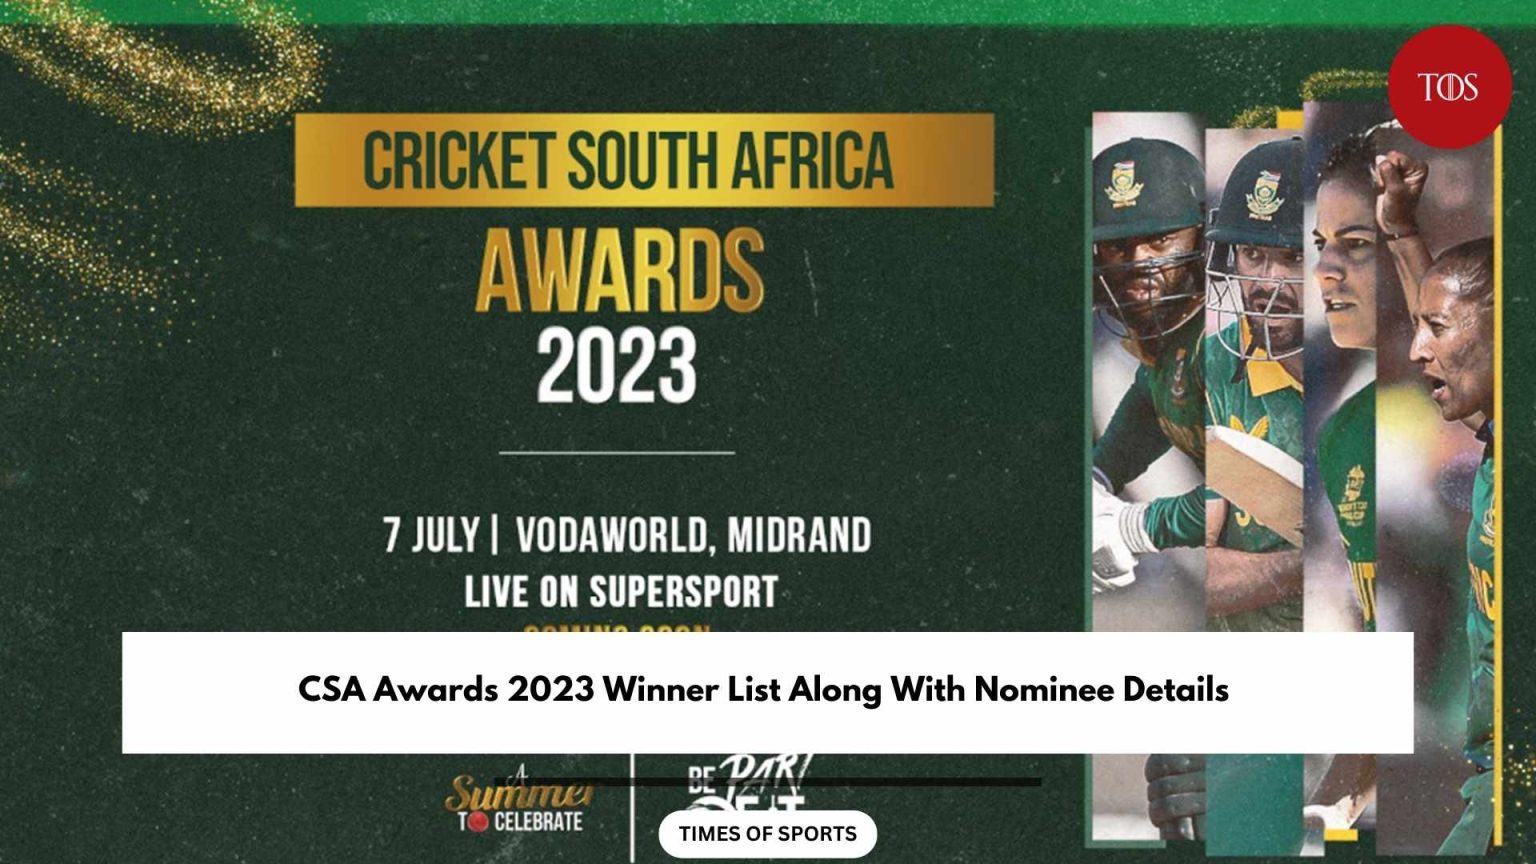 CSA Awards 2023 Winner List Along With Nominee Details